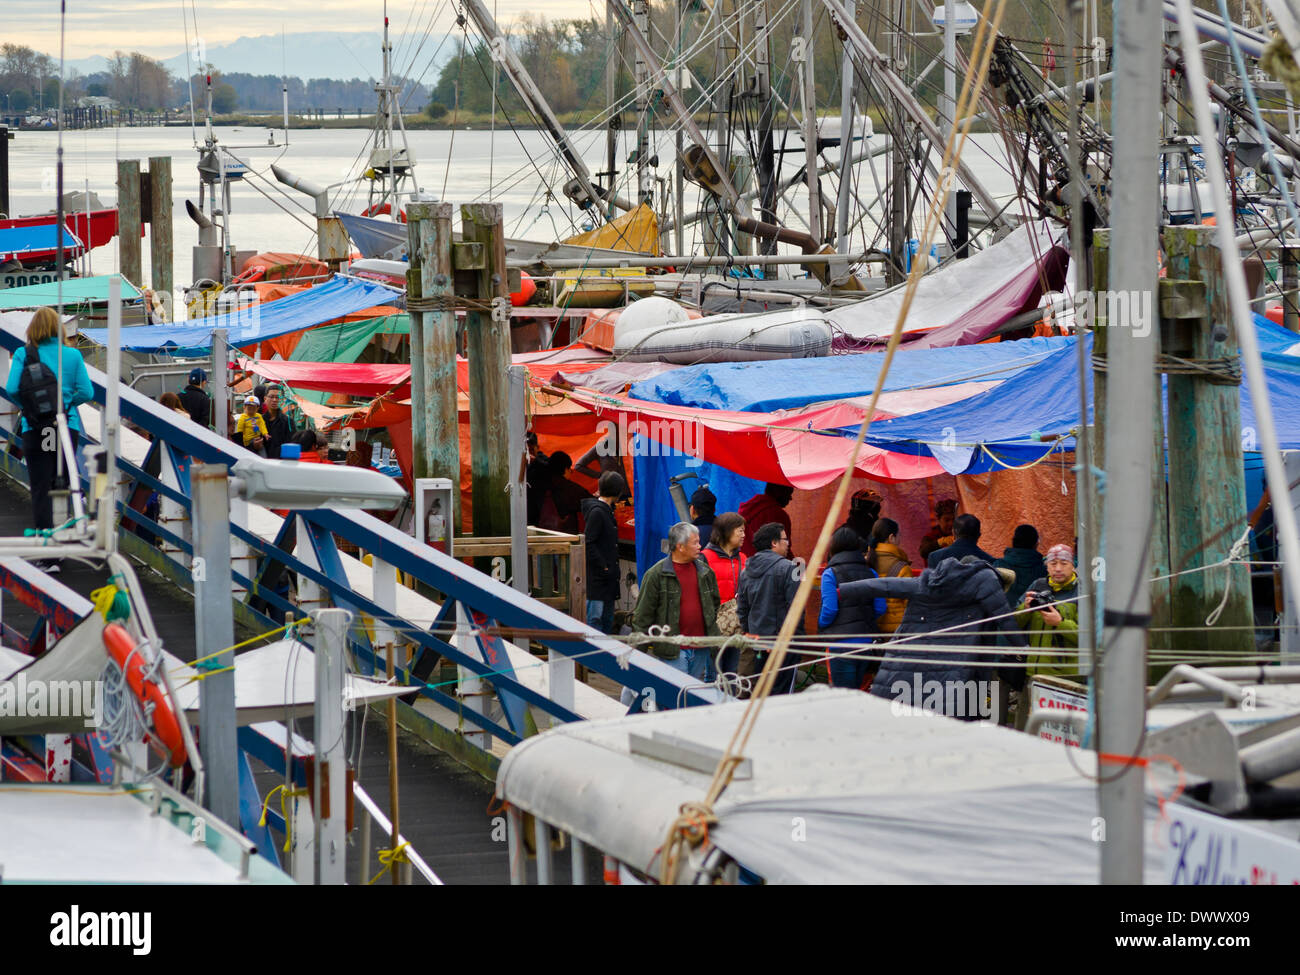 Buyers of fresh seafood visit the fishermen selling off their fishing boats at Fisherman's Wharf in Steveston, British Columbia. Stock Photo